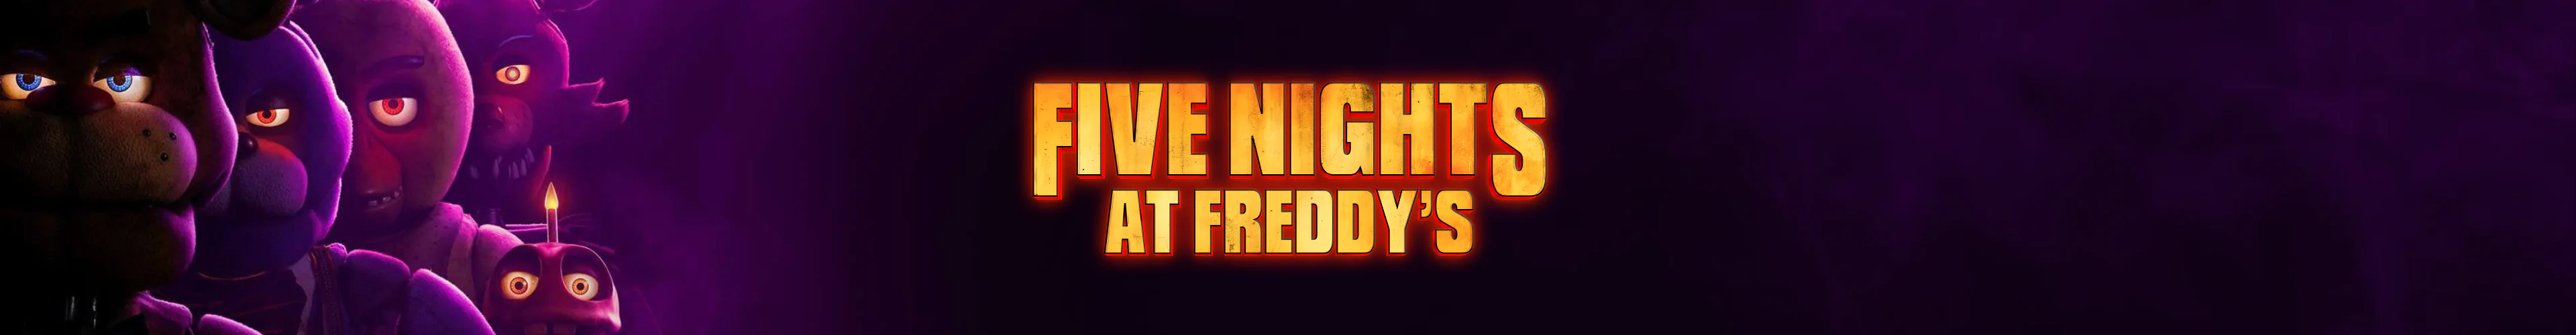 Five Nights at Freddy's Produkte banner